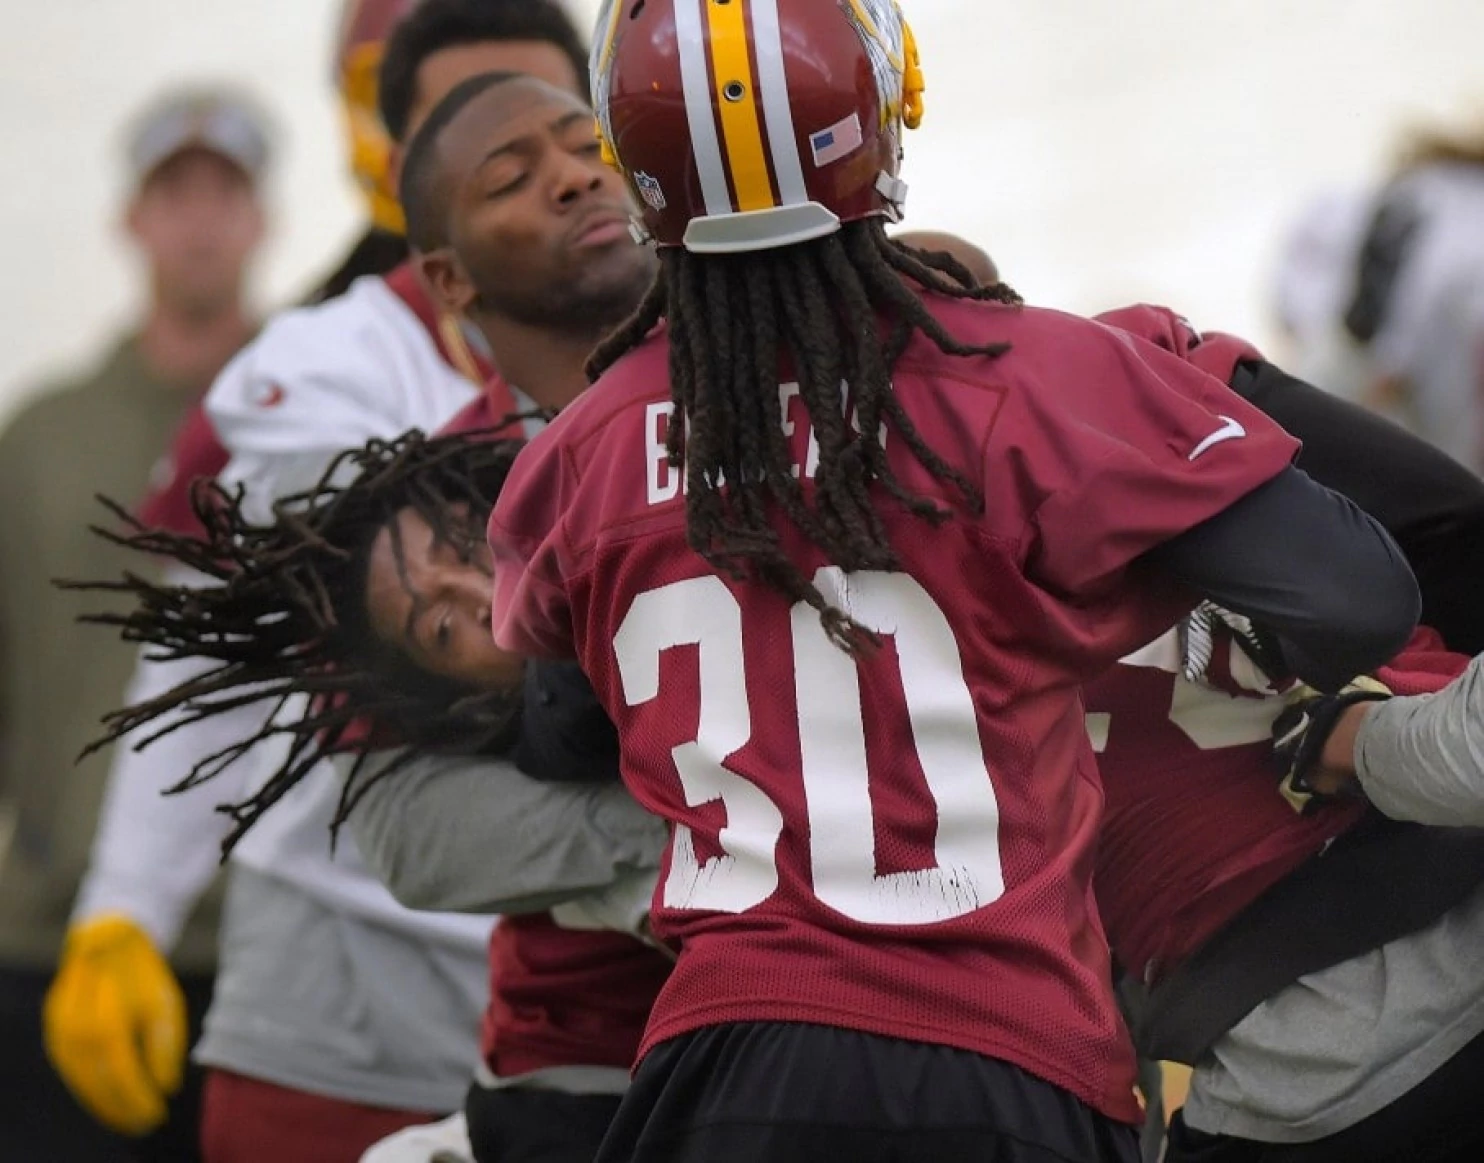 Bashaud Breeland Andre Roberts and Bashaud Breeland decline to comment on